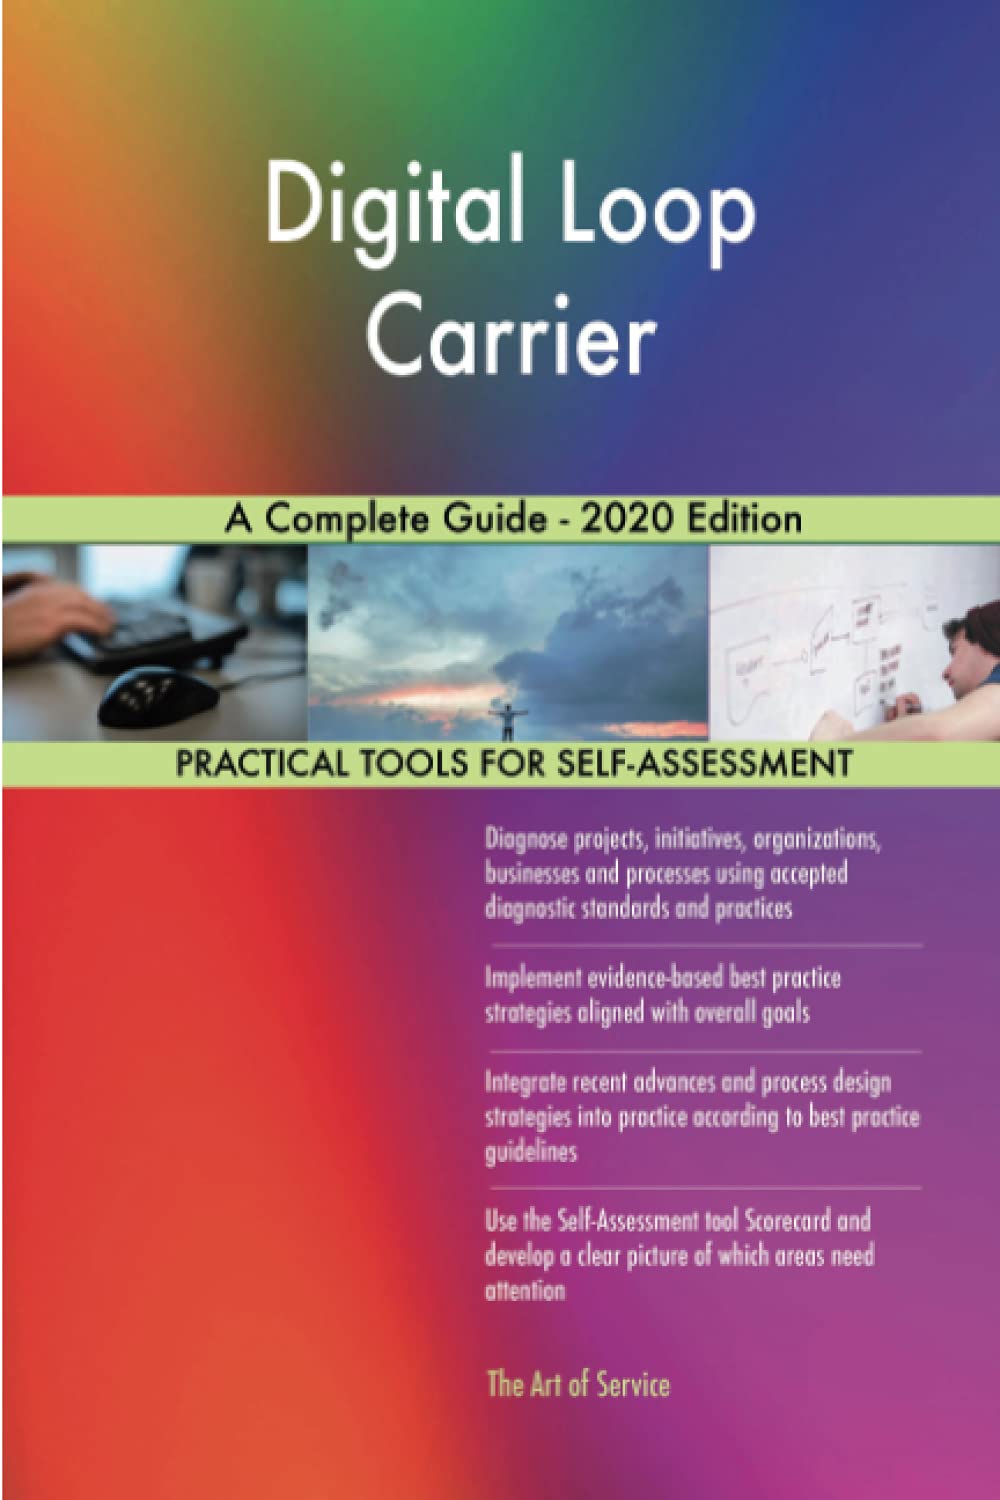 Digital Loop Carrier A Complete Guide - 2020 Edition